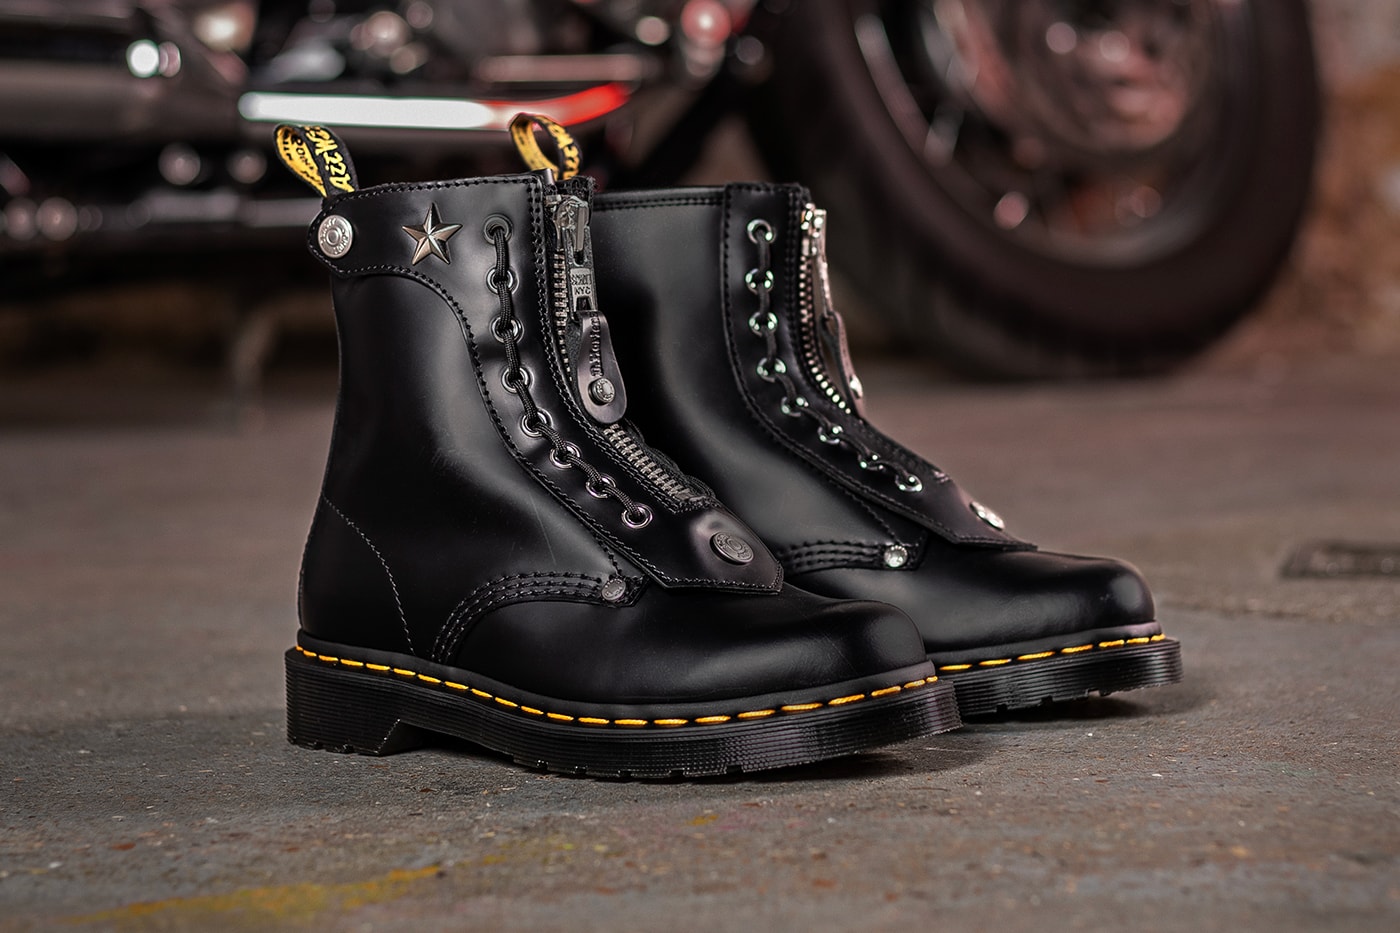 Schott NYC Dr. Martens 1460 1490 Boot Release boots footwear shoes leather star studs collaboration leather jacket biker